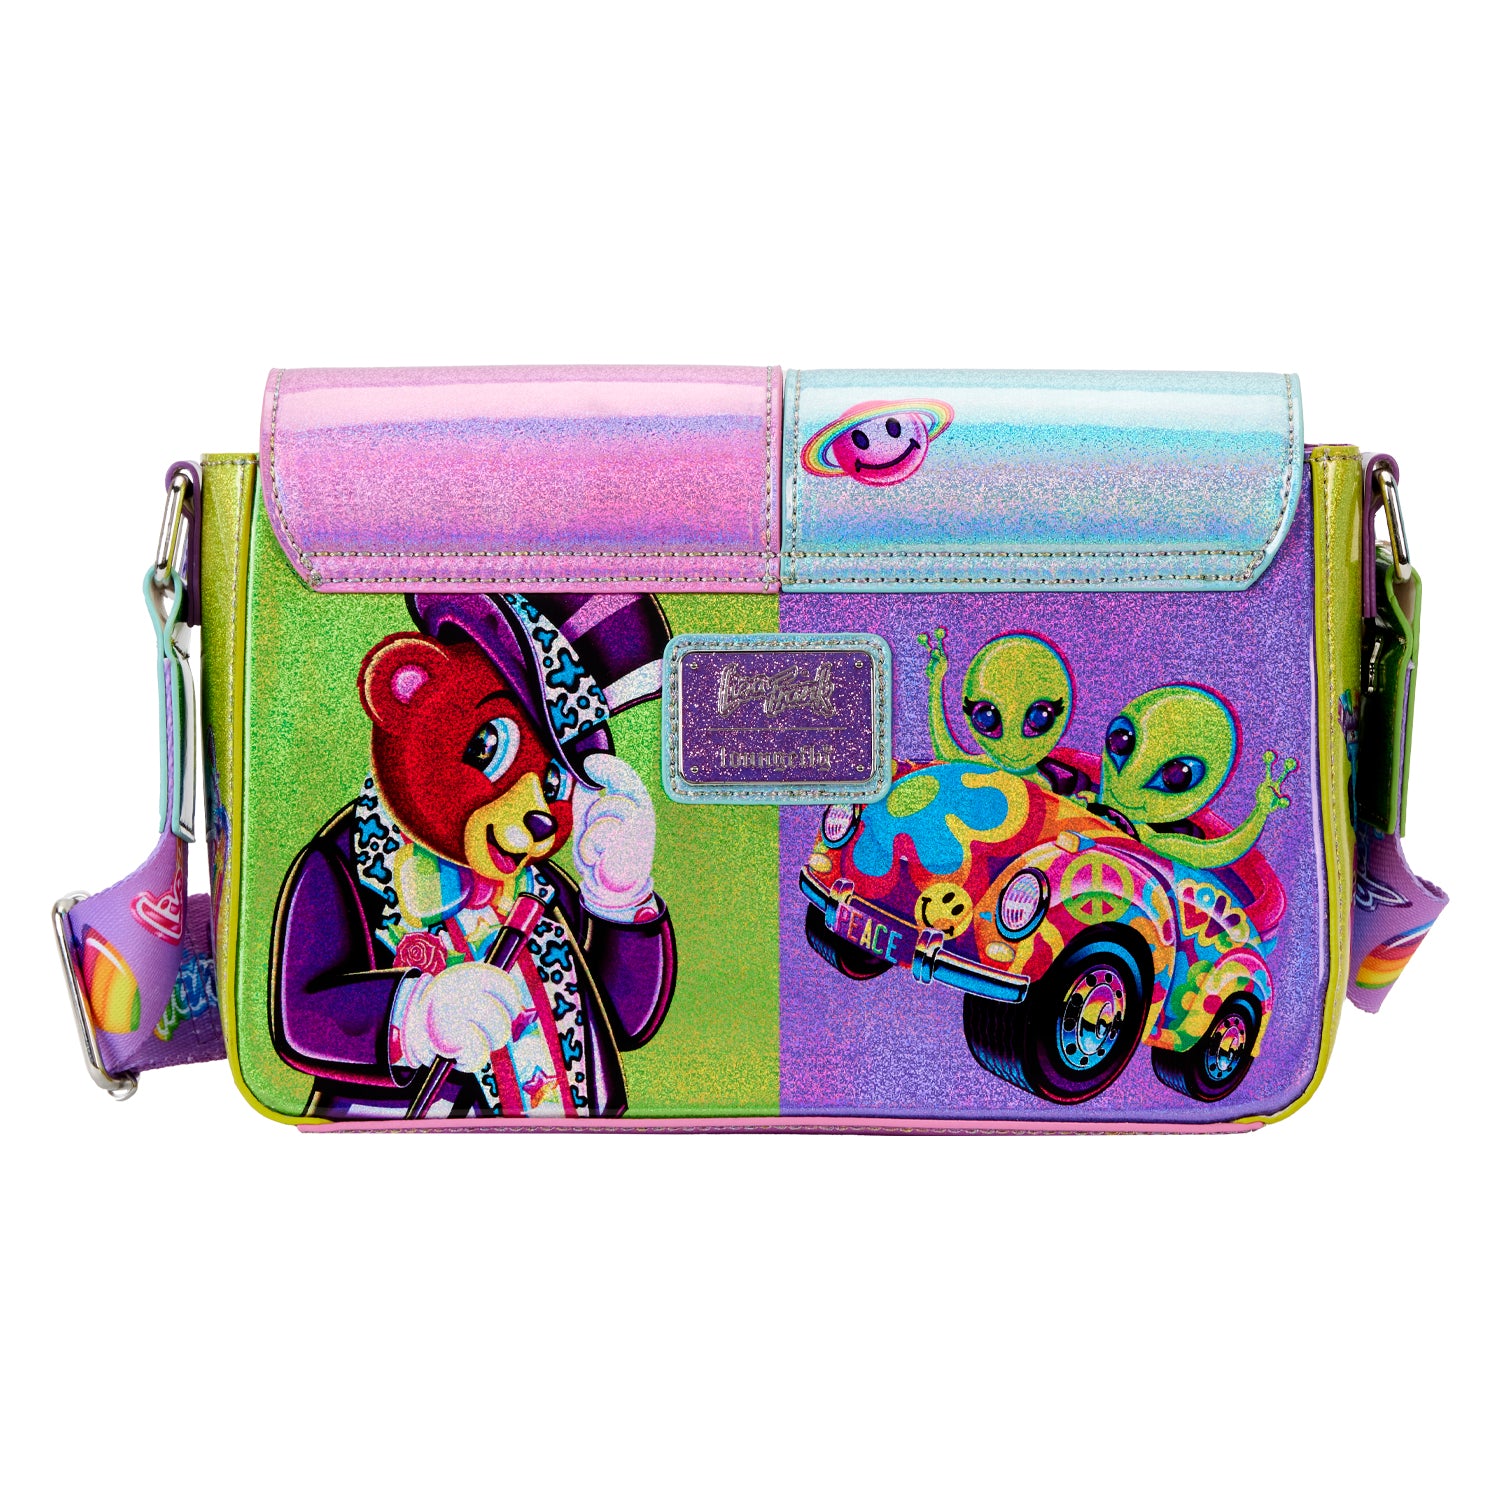 Loungefly Lisa Frank Holographic Glitter Color Block Zip Around